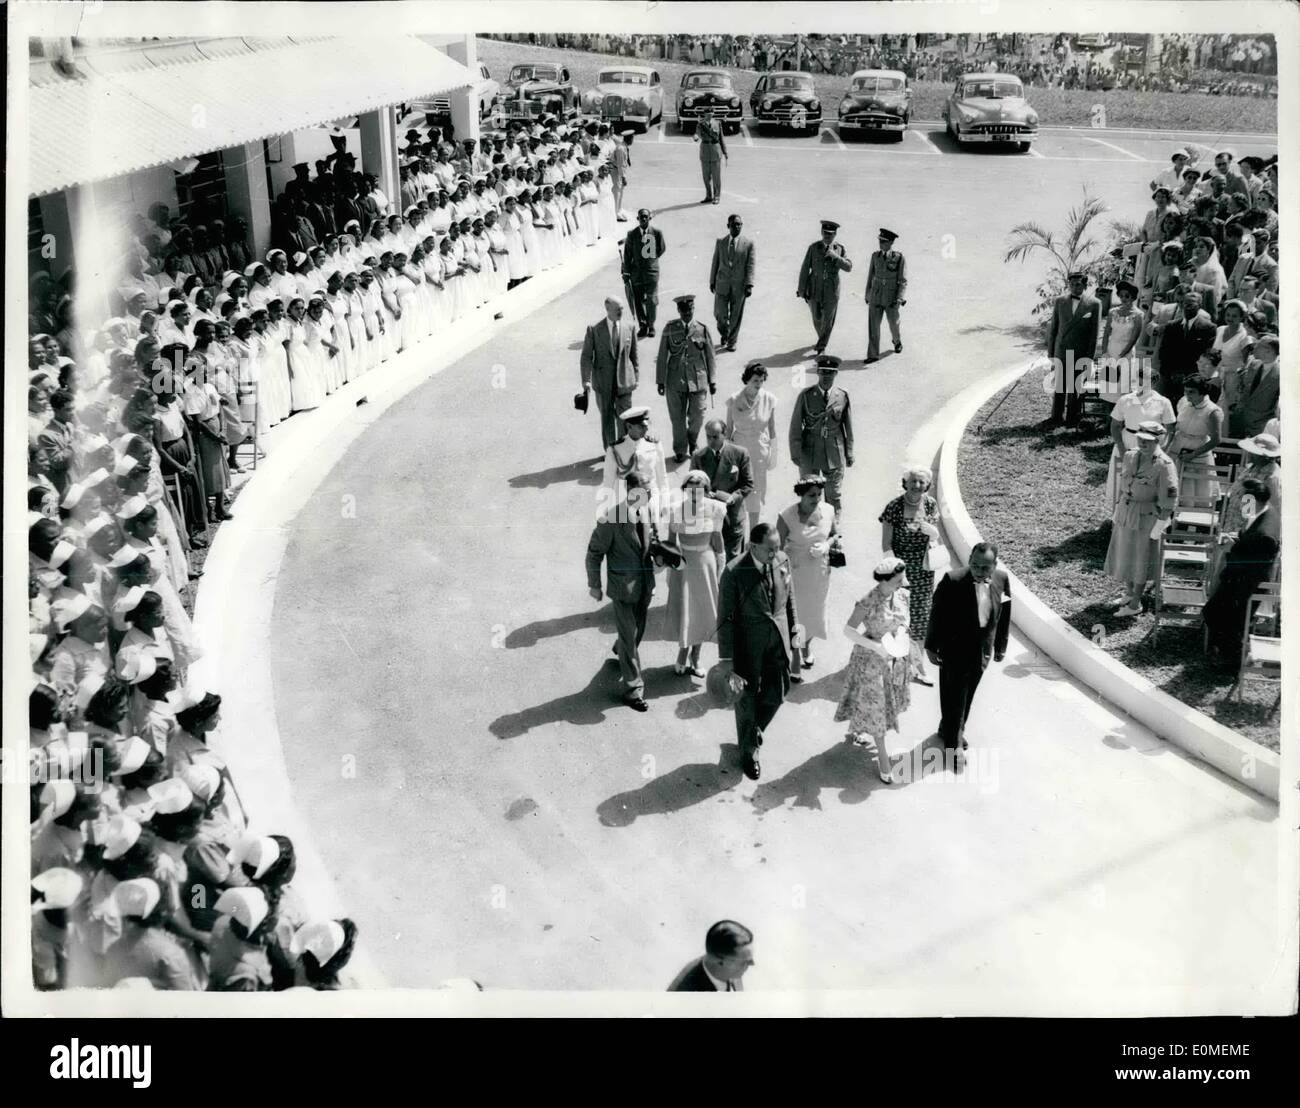 Feb. 02, 1955 - Nurses form guard of Honour as Princess Margaret opens new southern Trinidad Hospital. Photo shows Genera view showing nurses looking on as Princess Margaret arrives for the ceremony of opening the new San Fernando Hospital at Southern Trinidad. Stock Photo